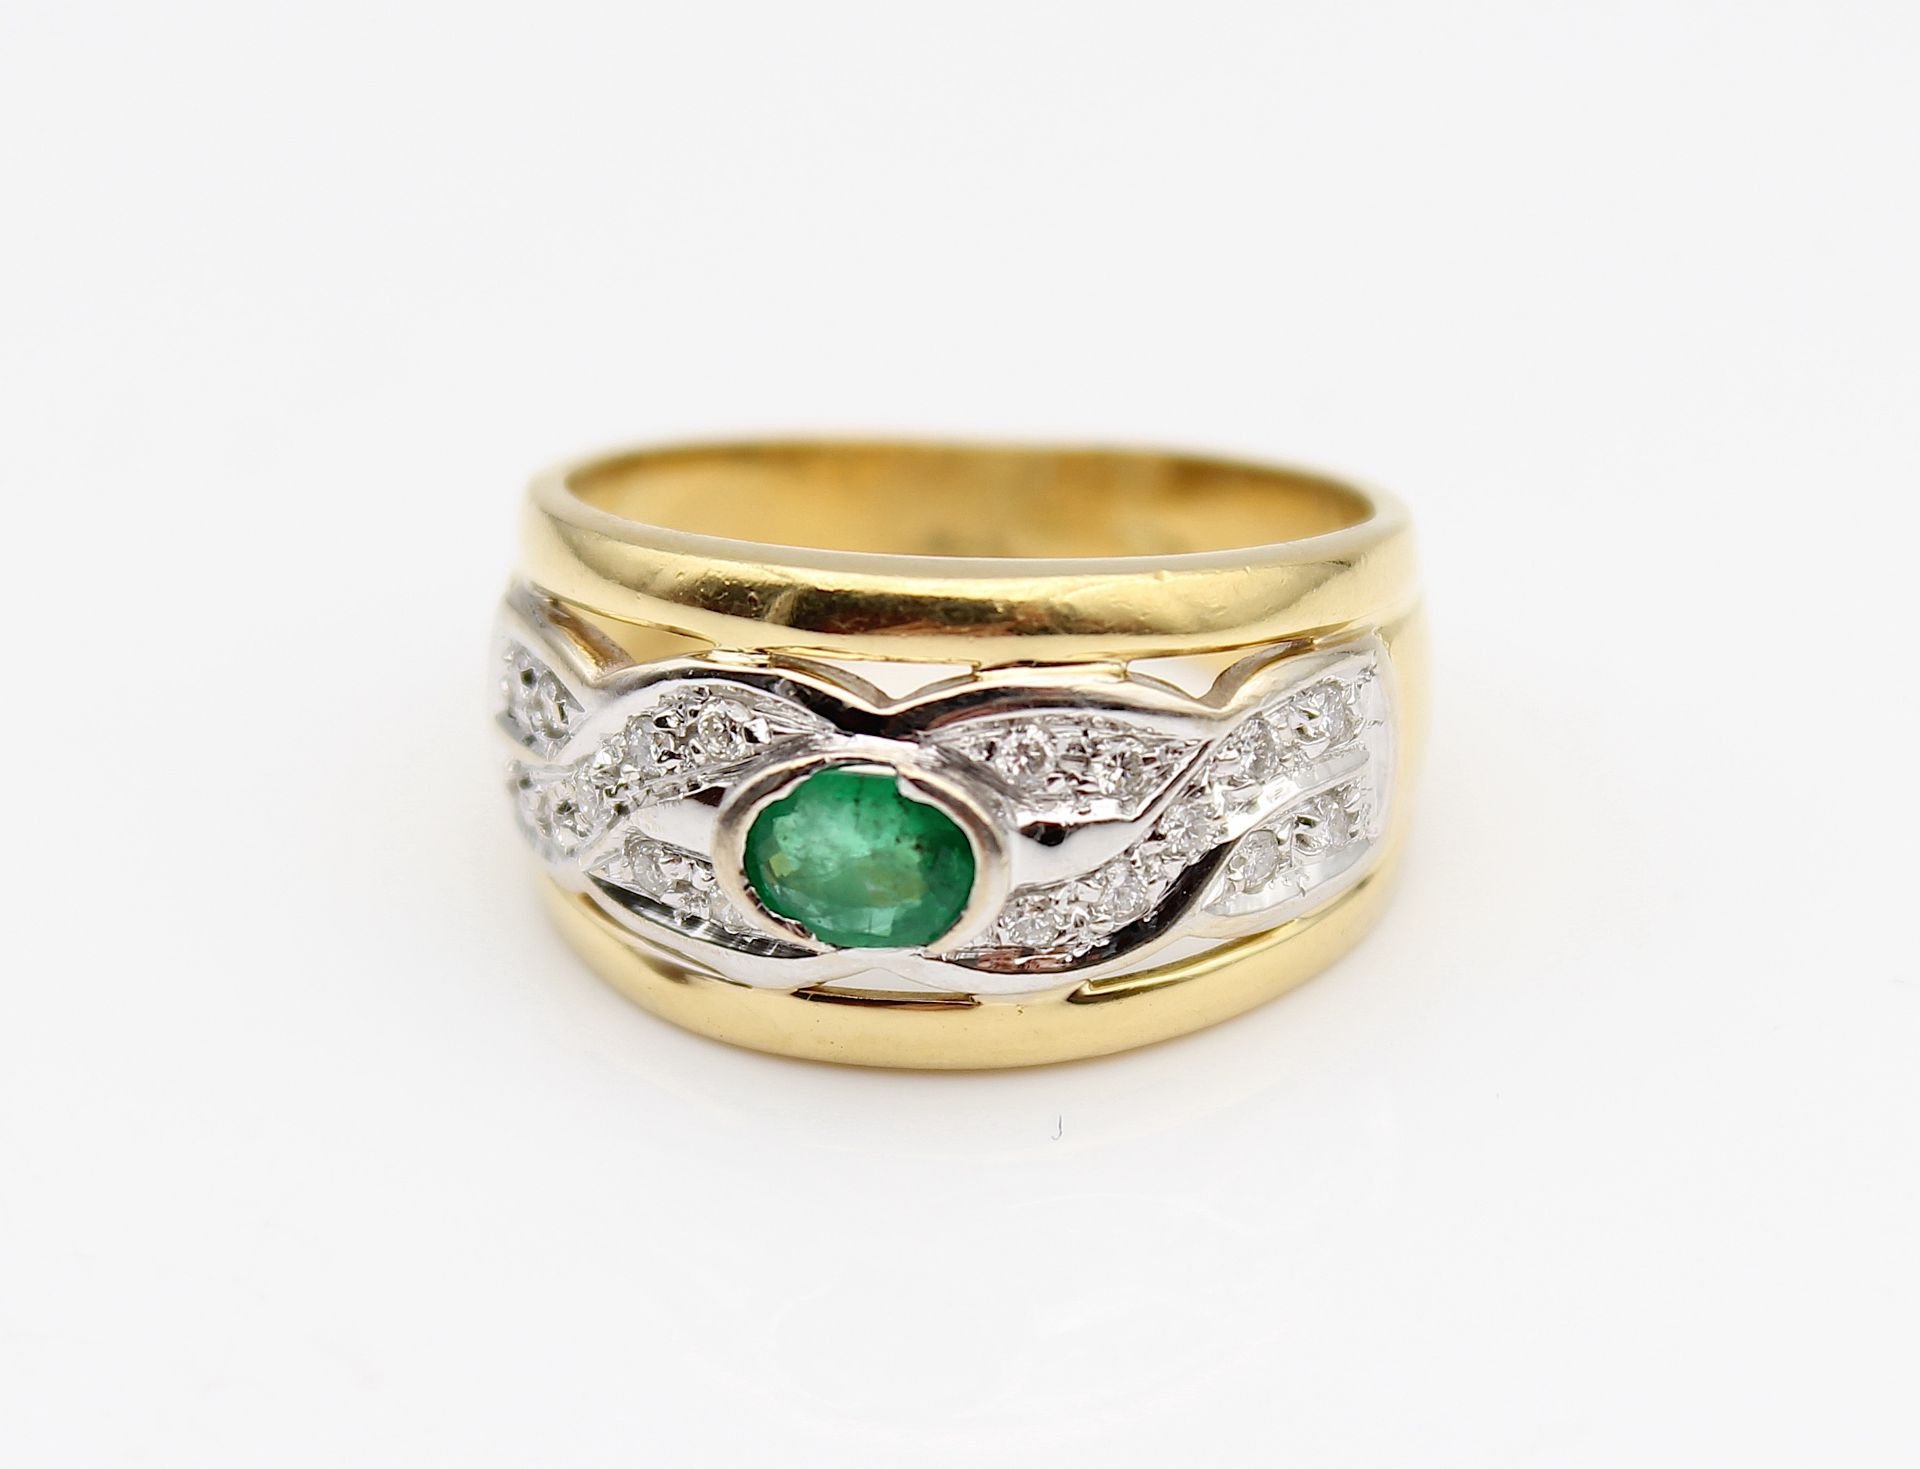 Charming ring with emerald and brilliants - Image 2 of 4